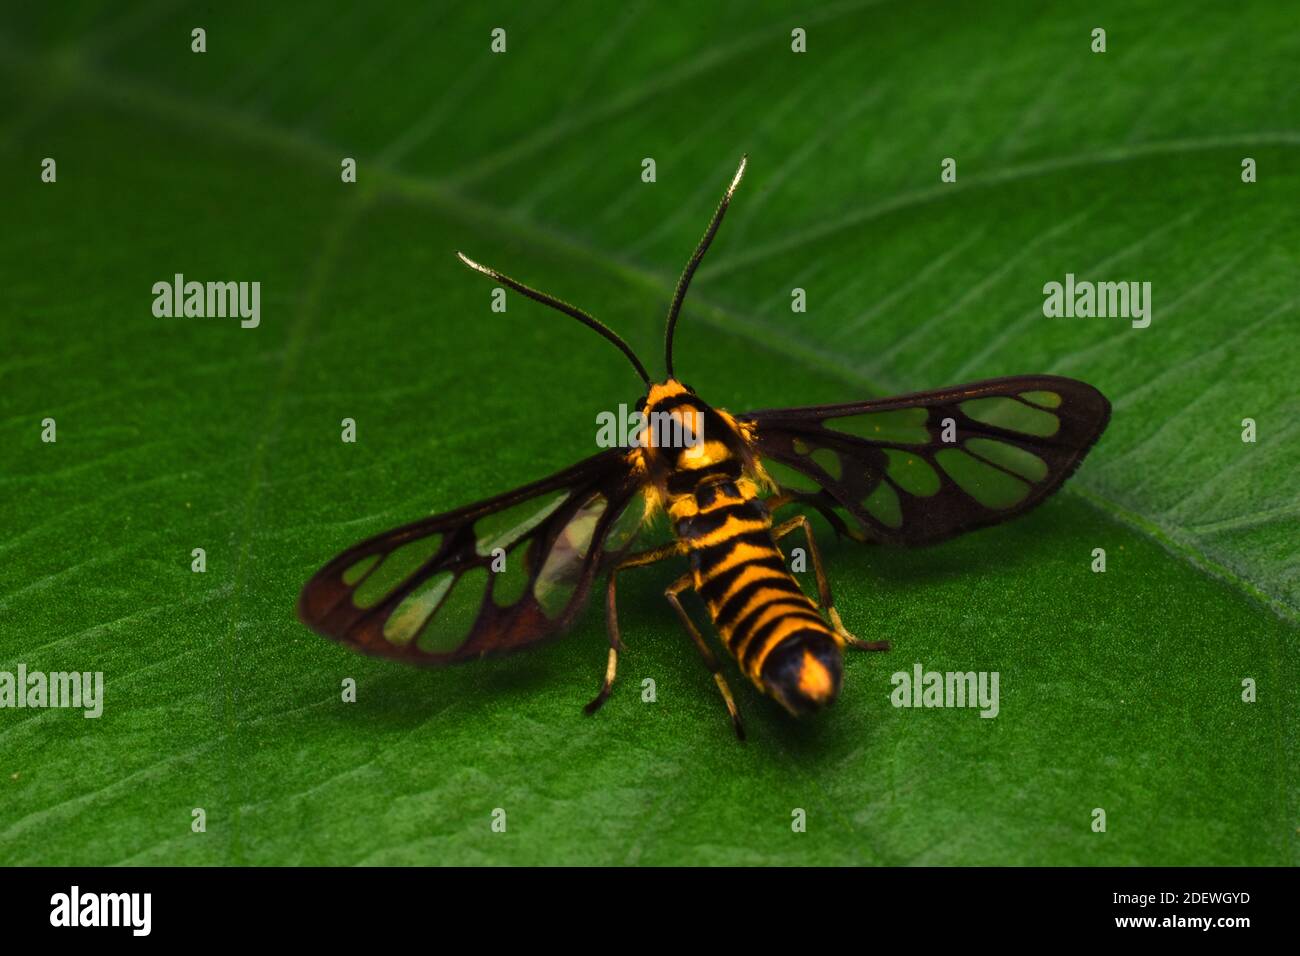 A Tiger moth perched on a green leaf Stock Photo